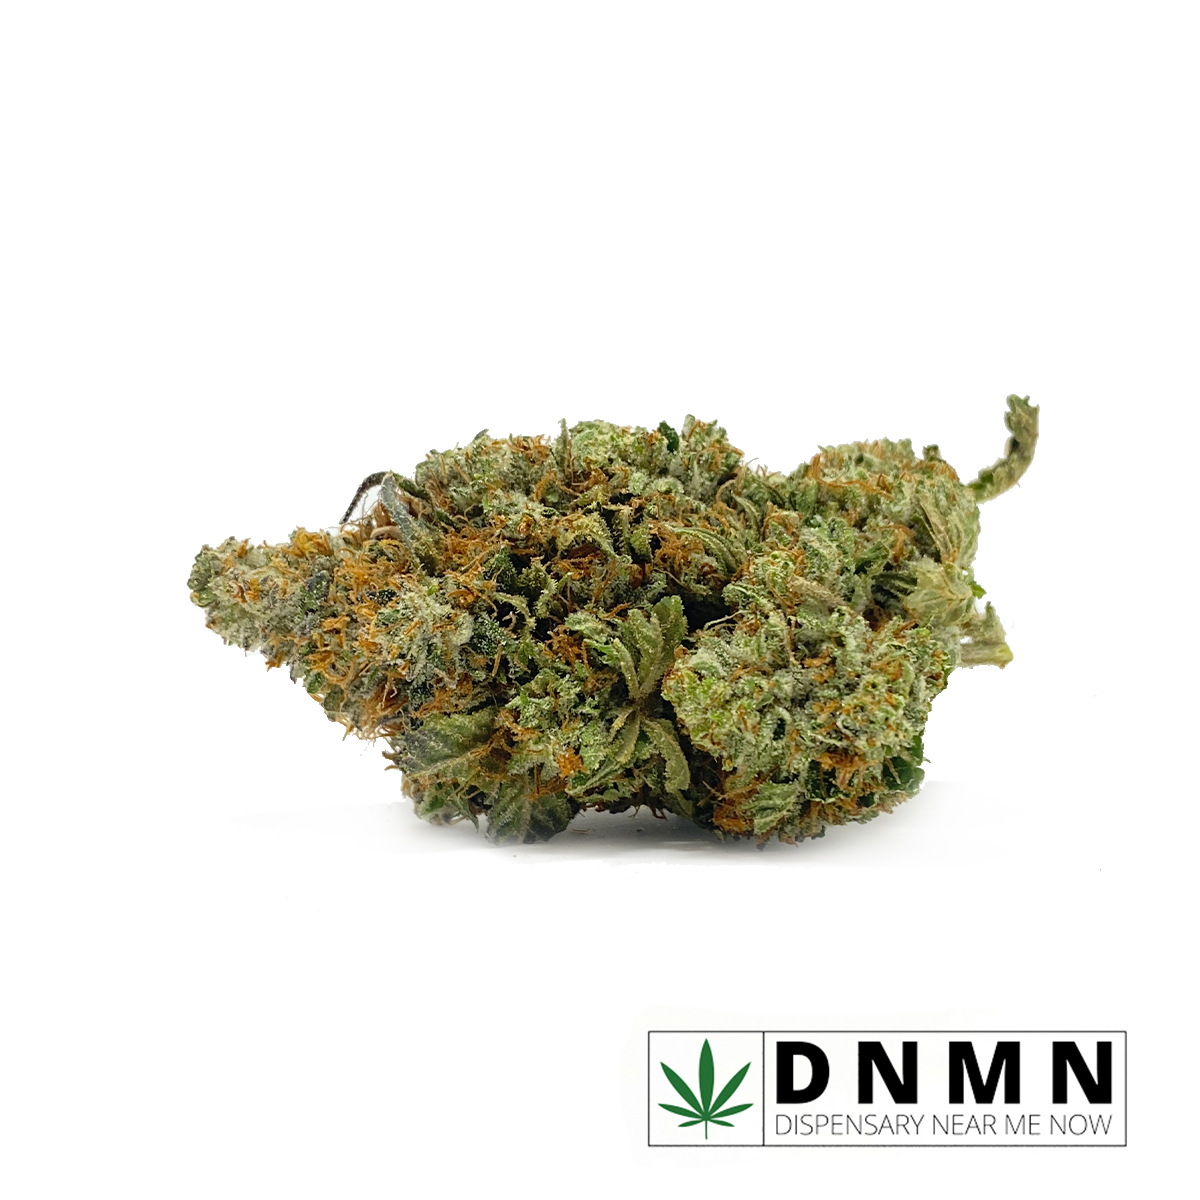 Tom Ford Bubba Kush| Buy Weed Online | Dispensary Near Me